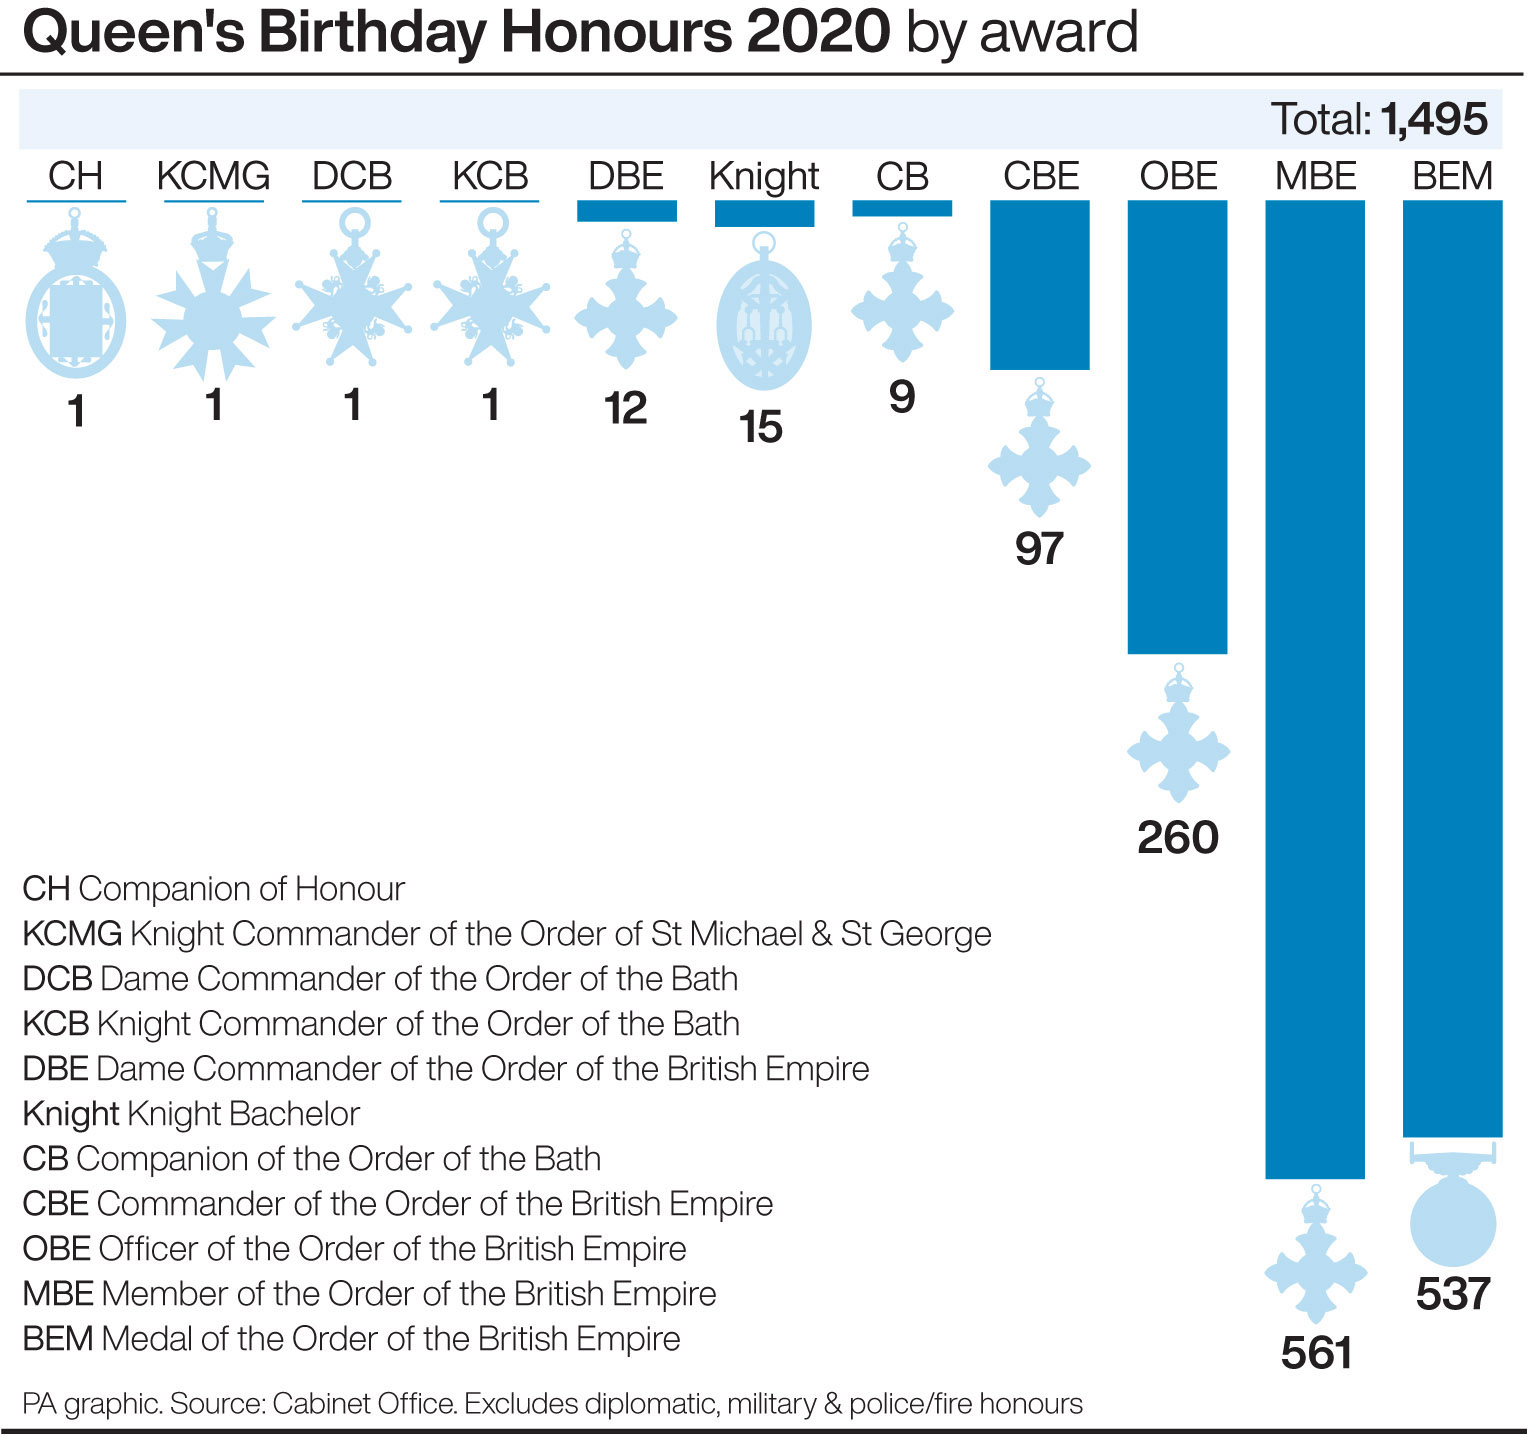 Queen's Birthday Honours 2020 by award